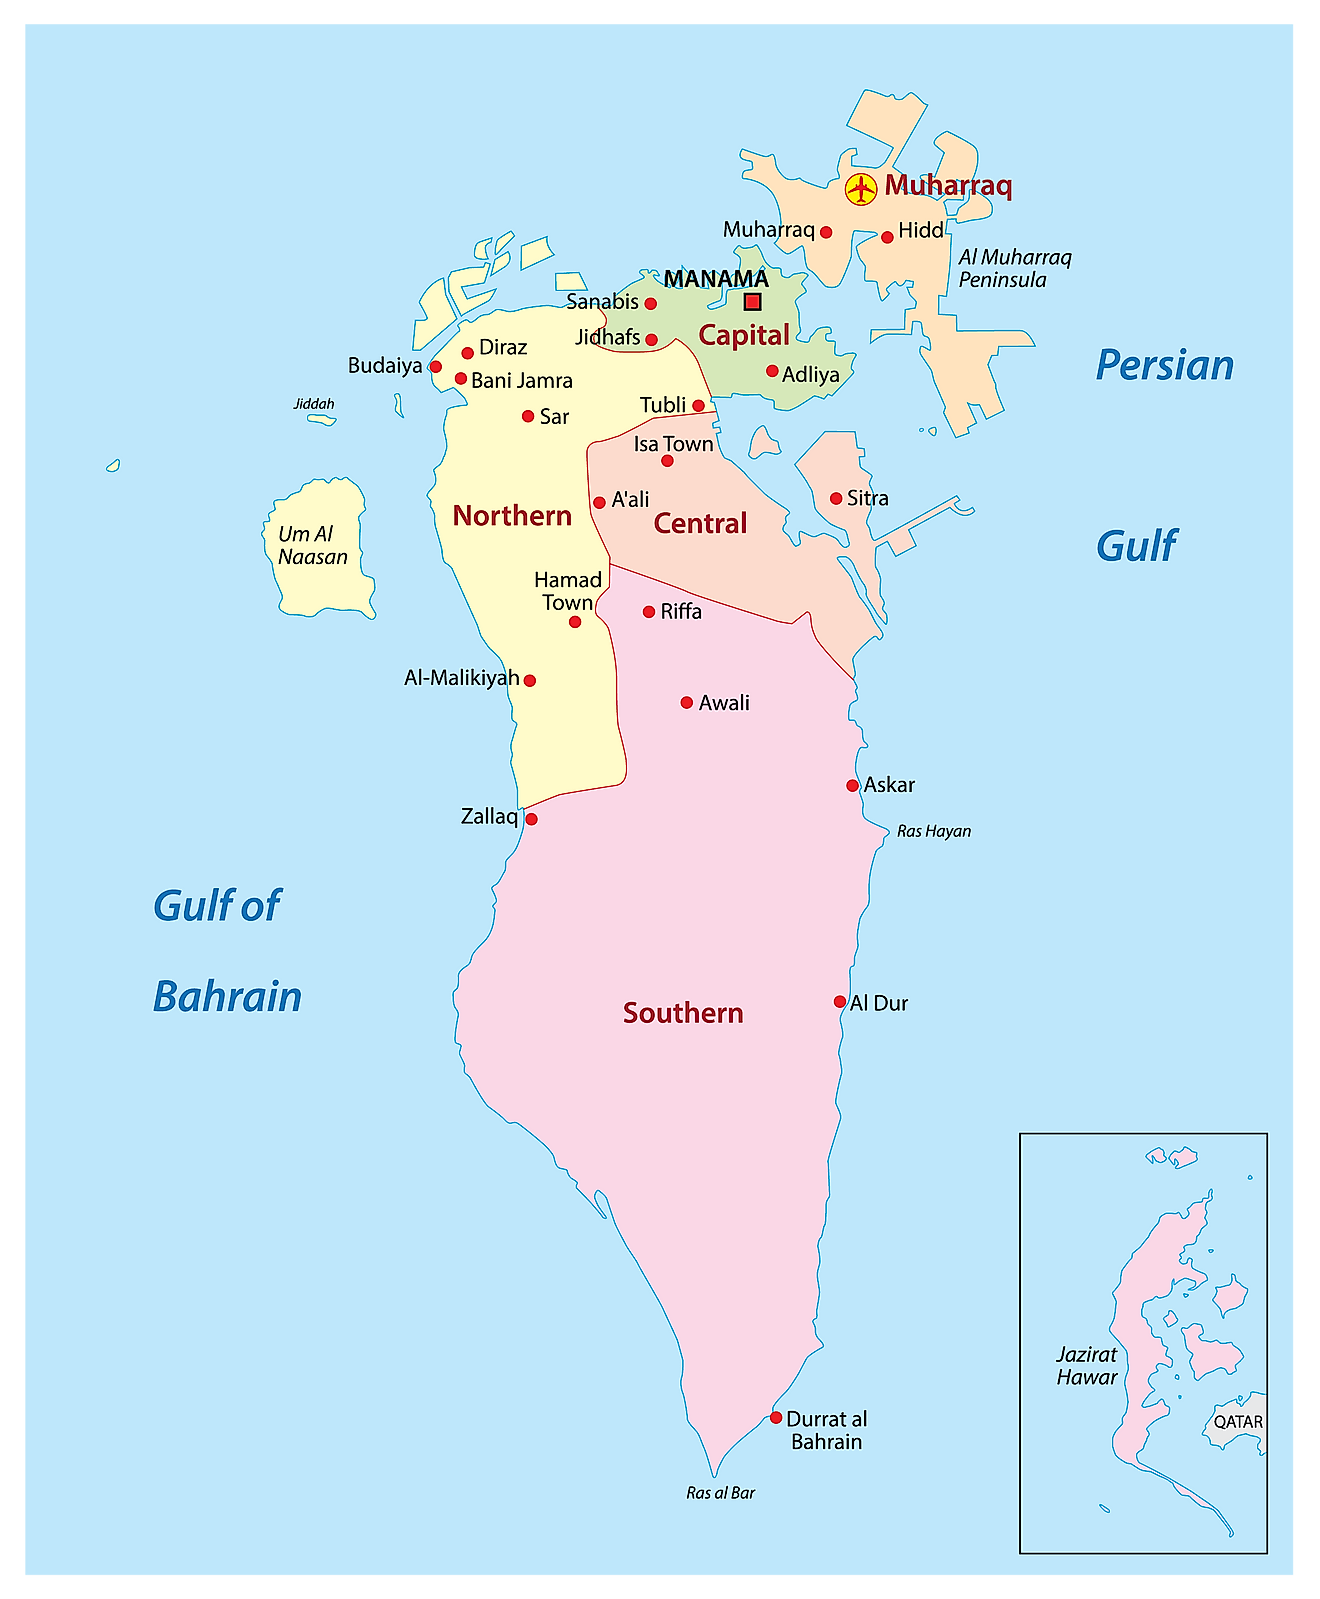 Political Map of Bahrain showing 4 governorates, their capitals, and the national capital of Manama.